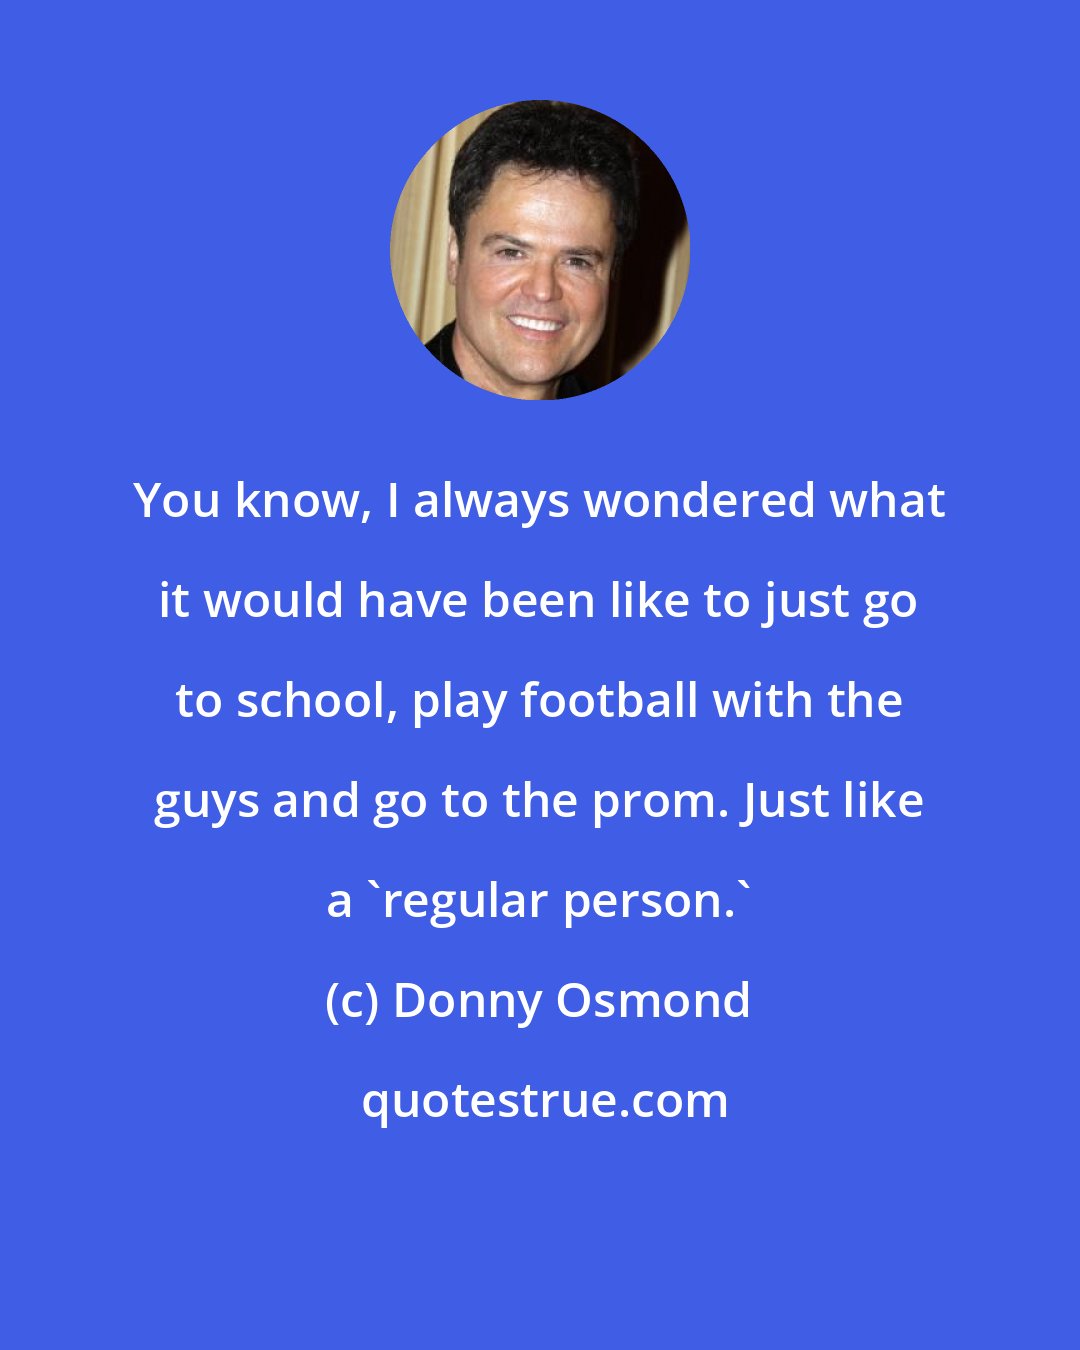 Donny Osmond: You know, I always wondered what it would have been like to just go to school, play football with the guys and go to the prom. Just like a 'regular person.'